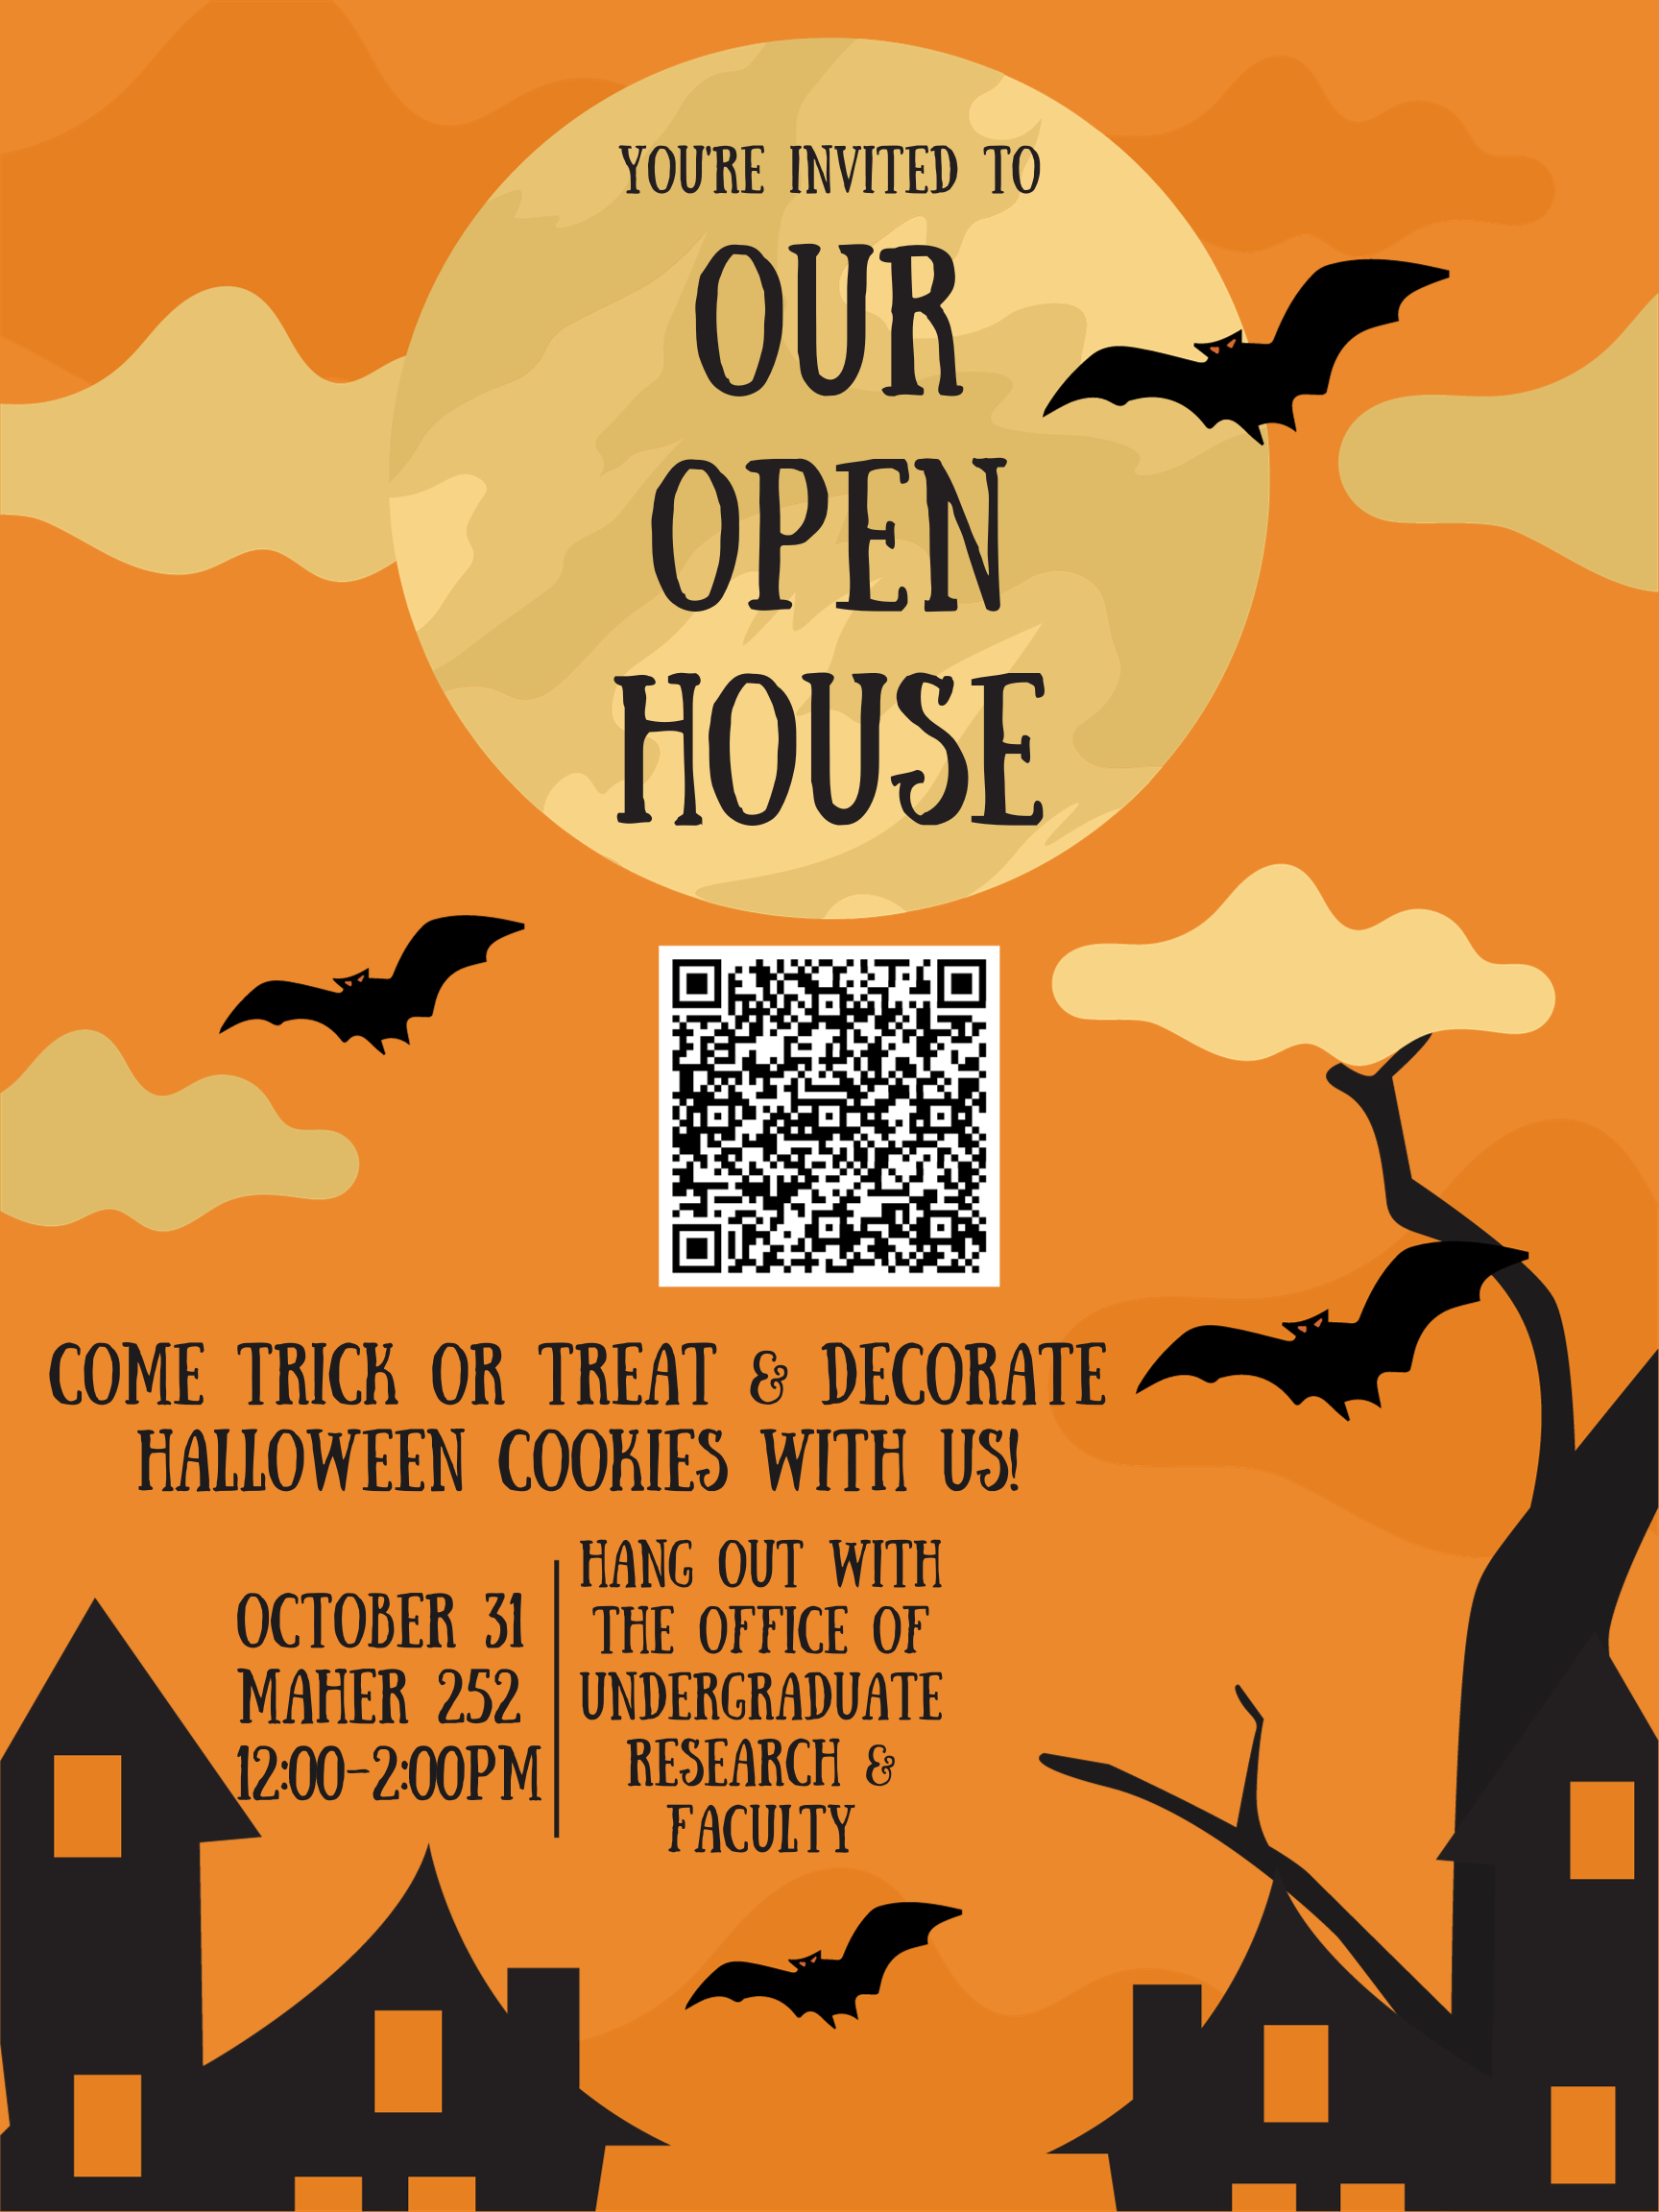 OUR Open House on October 31 from 12 - 2 pm in Maher 252 with Halloween cookie decorating